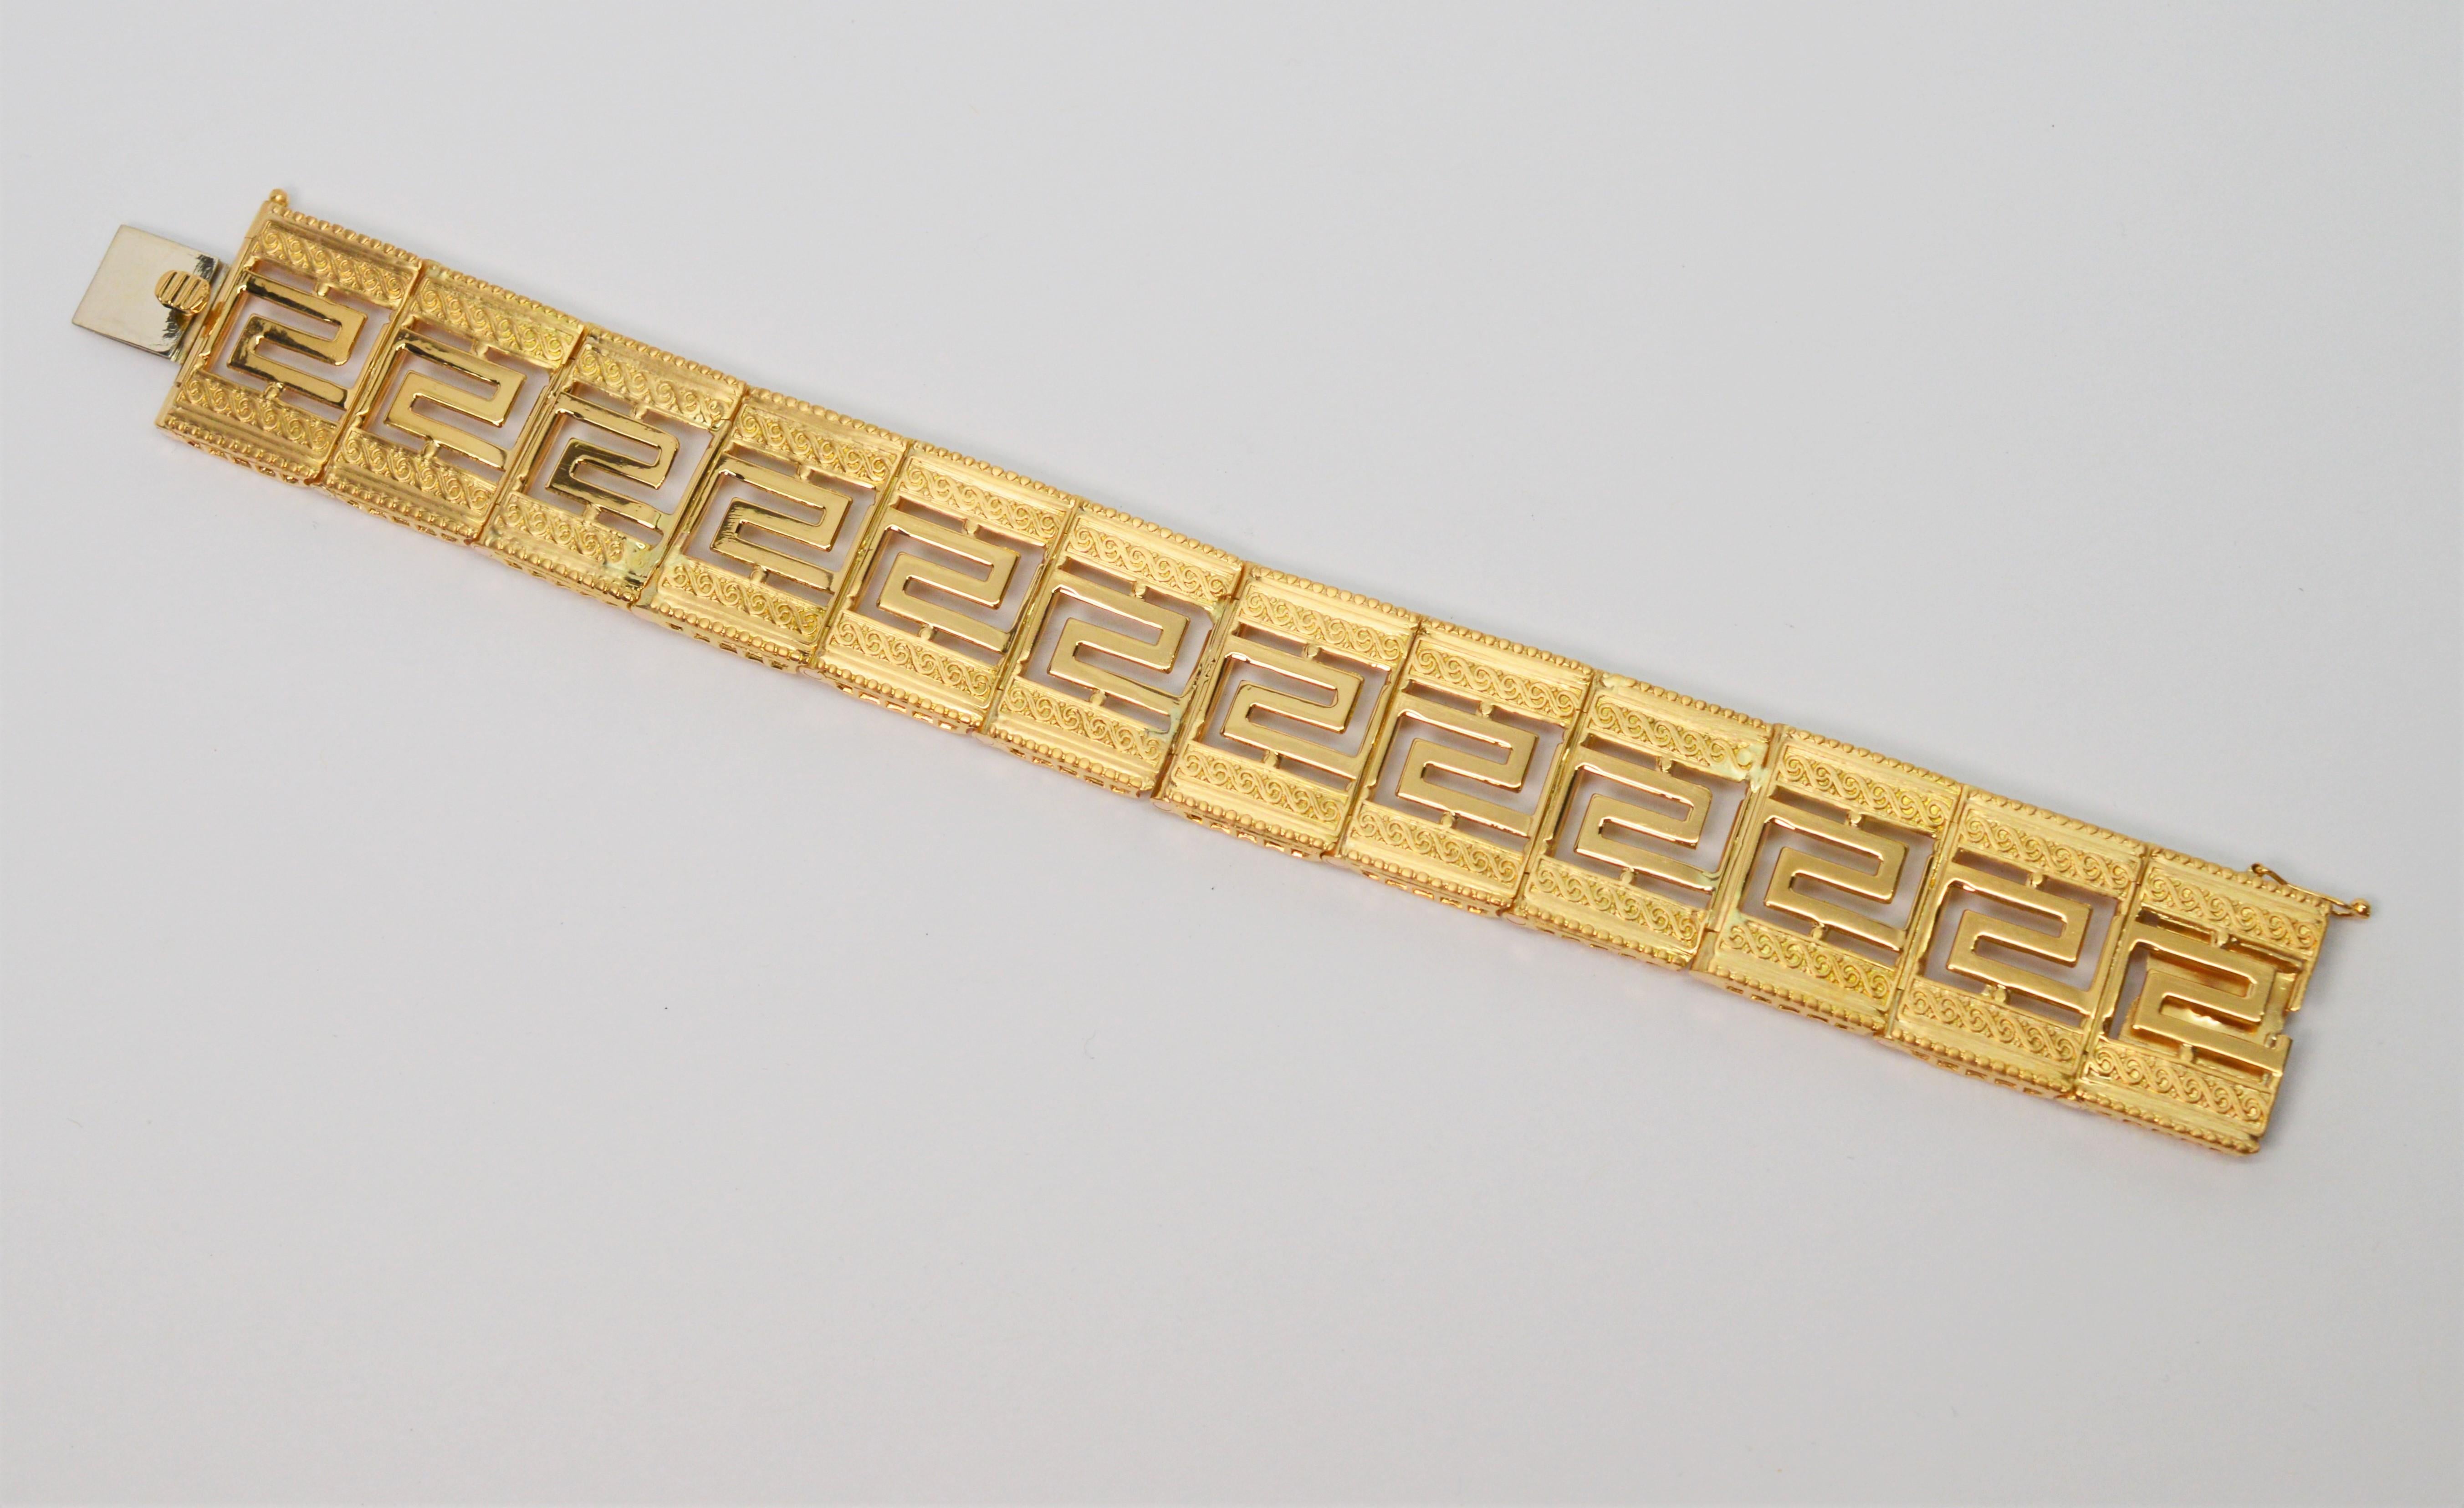 This stunning two-toned eighteen karat (18K) yellow gold geometric link bracelet with satin and bright finish details shows beautifully on the wrist. Circa 1950's, the substantial piece is crafted with rectangular tile-links enhanced with scroll